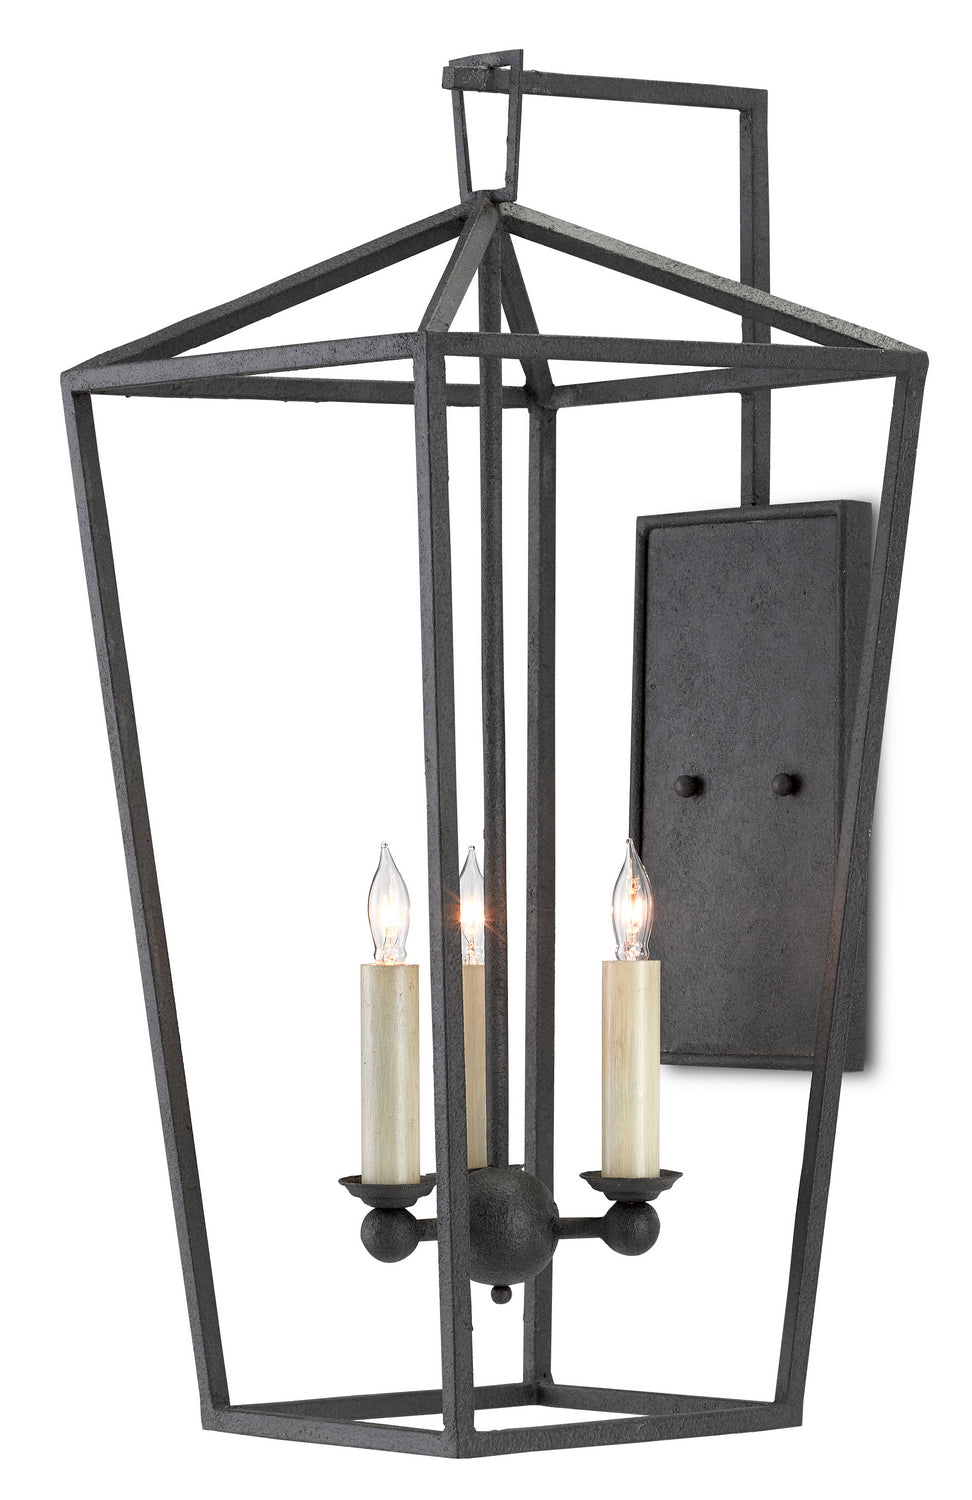 Three Light Wall Sconce from the Denison collection in Molé Black finish